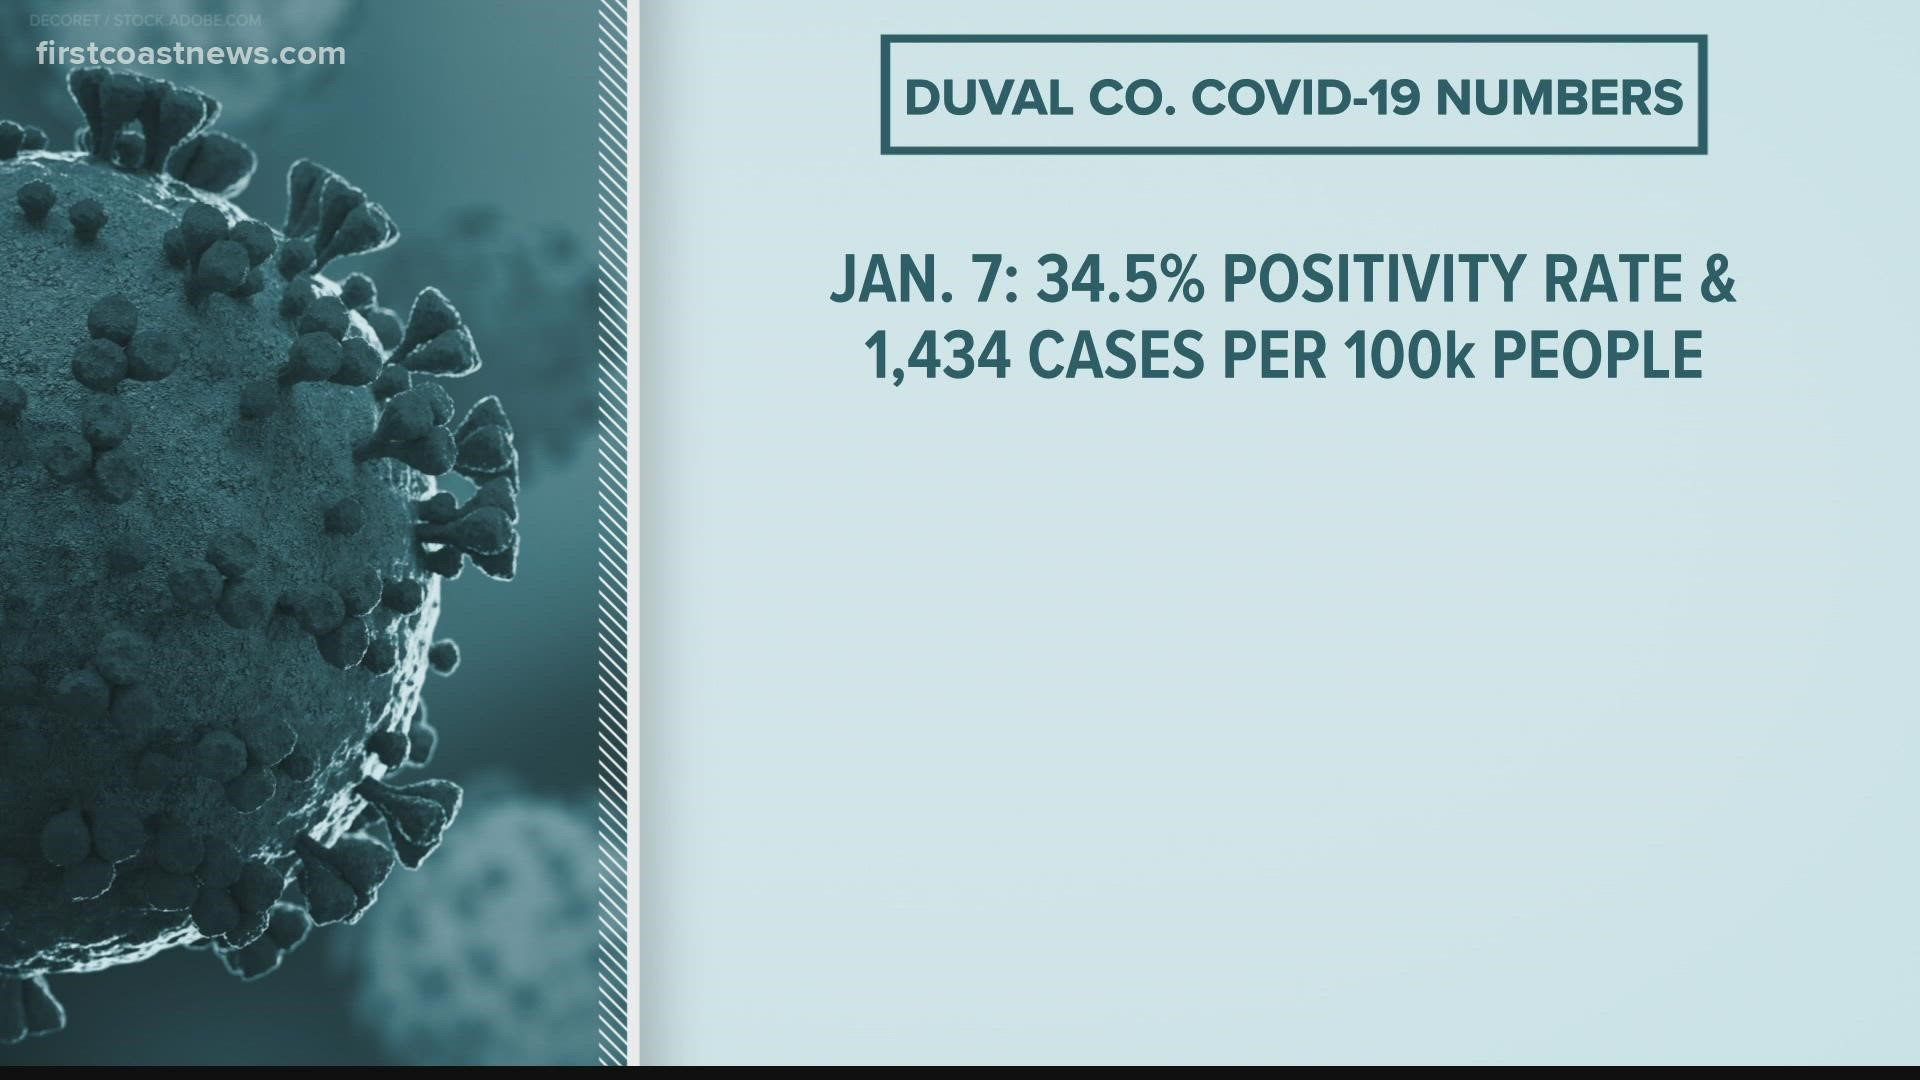 Dr. Diana Greene says as of Monday, there were 473 COVID-19 positive cases.